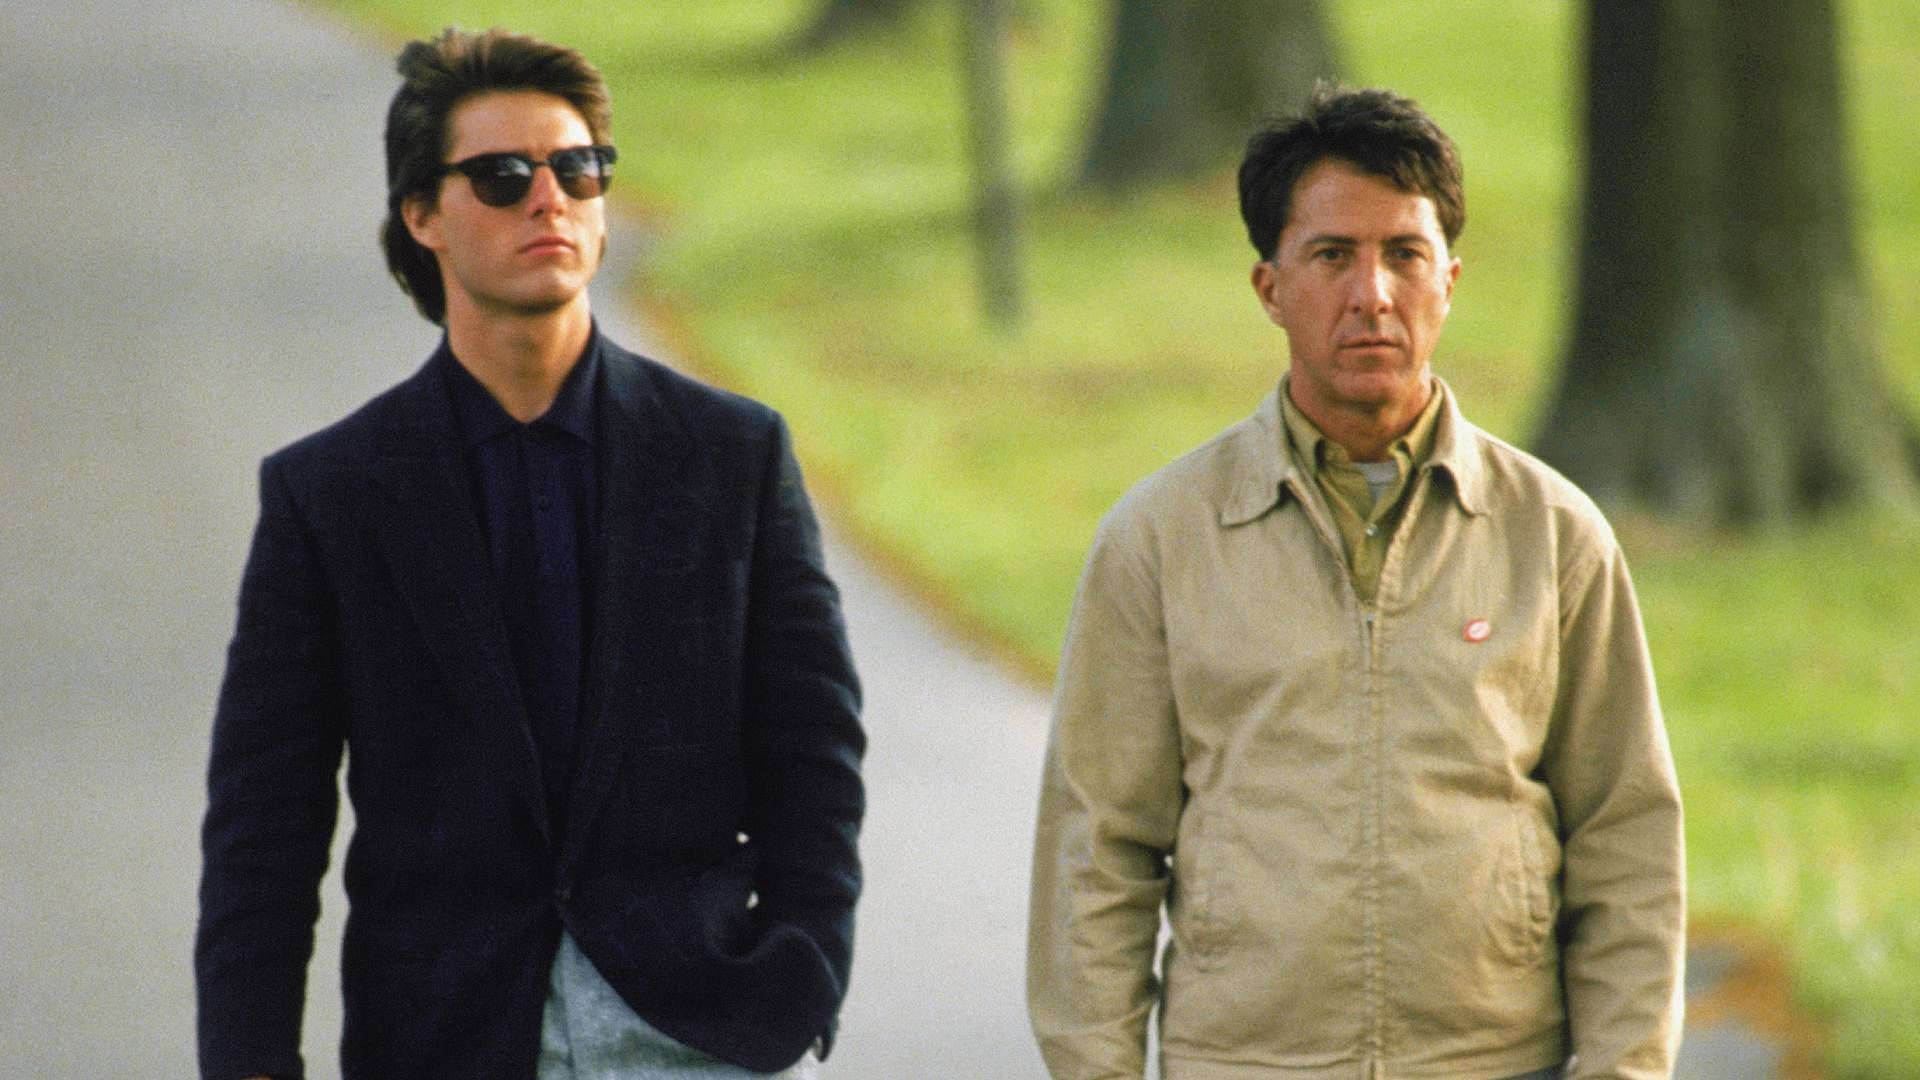 <p>                     While Rain Man contains a lot of incredible moments, it’s the scene when Tom Cruise’s Charlie Babbitt finds out the truth of how his brother left that secures itself as one of the actor’s best on-screen moments. "You’re the rain man," he says to Dustin Hoffman’s Raymond "Ray" Babbitt in the bathroom as he discovers that someone he thought was his imaginary childhood friend was actually his brother all along. Hoffman deservedly received a lot of acclaim for his performance in Rain Man, but watching Cruise work through his emotions as he discovers Ray actually lived with him before being sent away is hugely emotional, and marks one of the most nuanced performances of his career.                   </p>